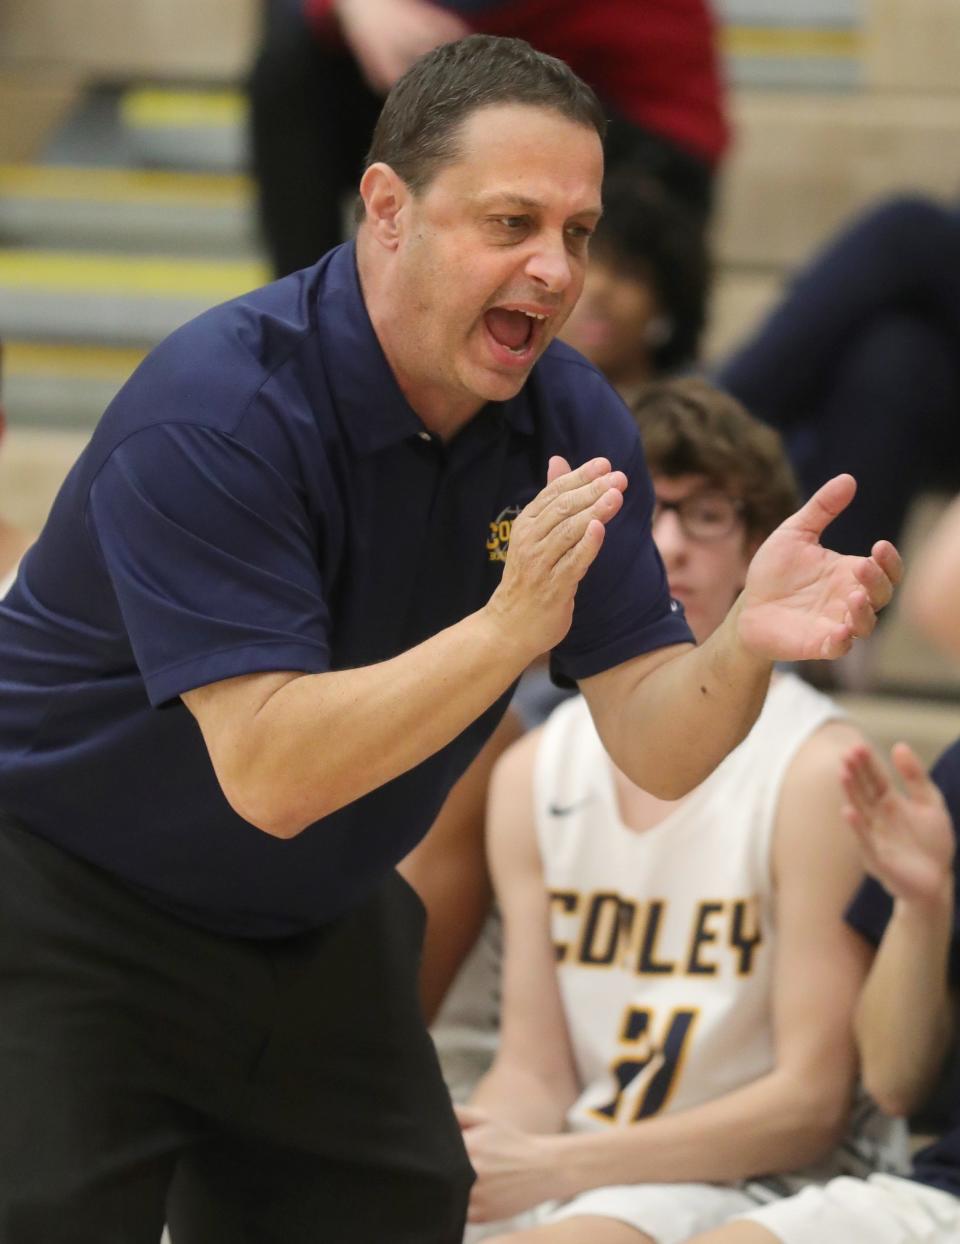 Copley coach Mark Dente gets his team fired up against Revere on Feb. 8 in Copley.